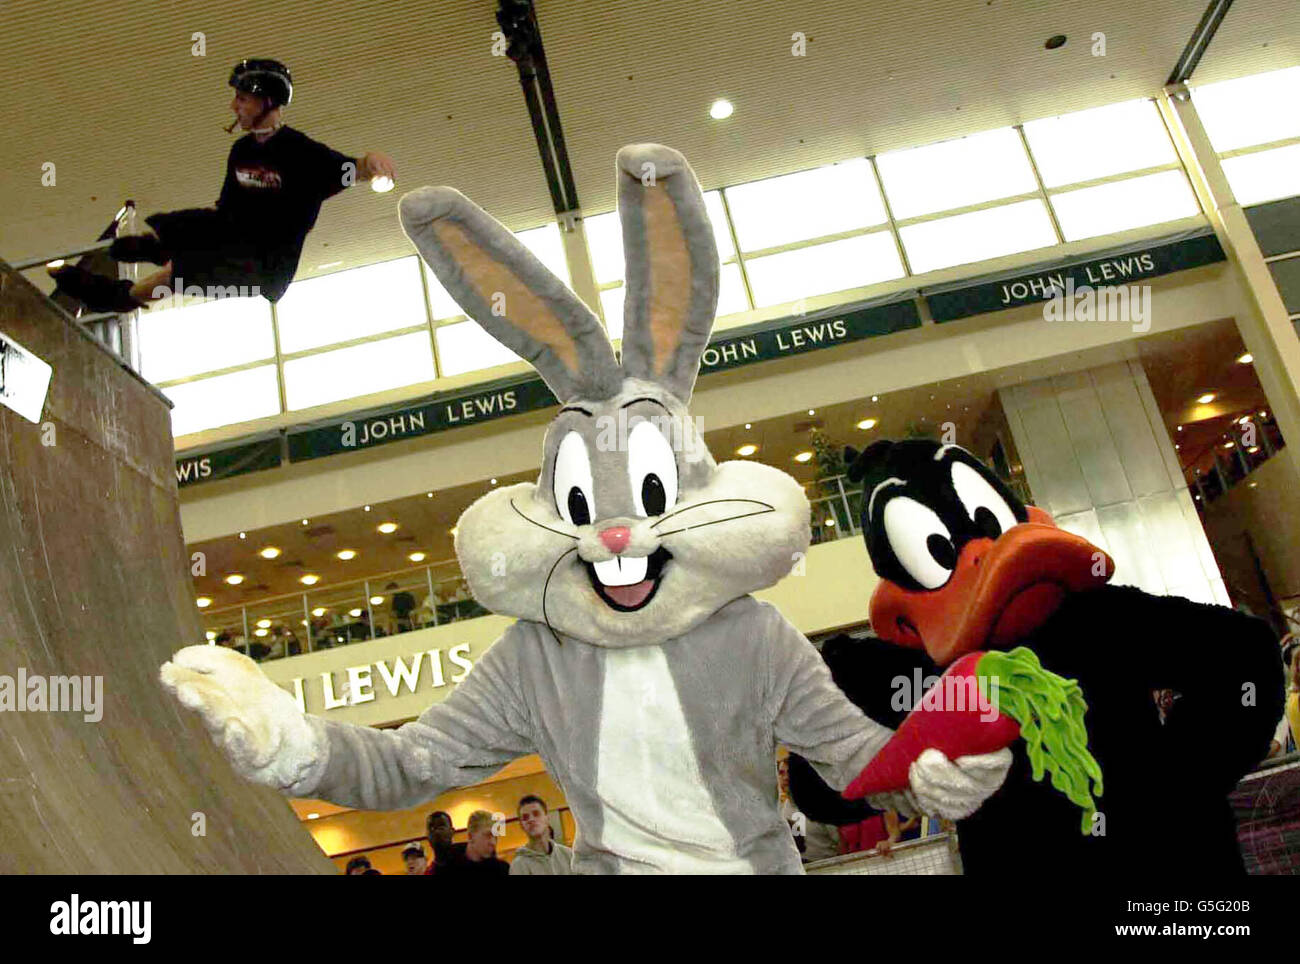 An inline skater shows off his tricks at the Looney Tunes skate village, Milton Keynes, watched by cartoon characters Bugs Bunny (L) and Daffy Duck. Stock Photo